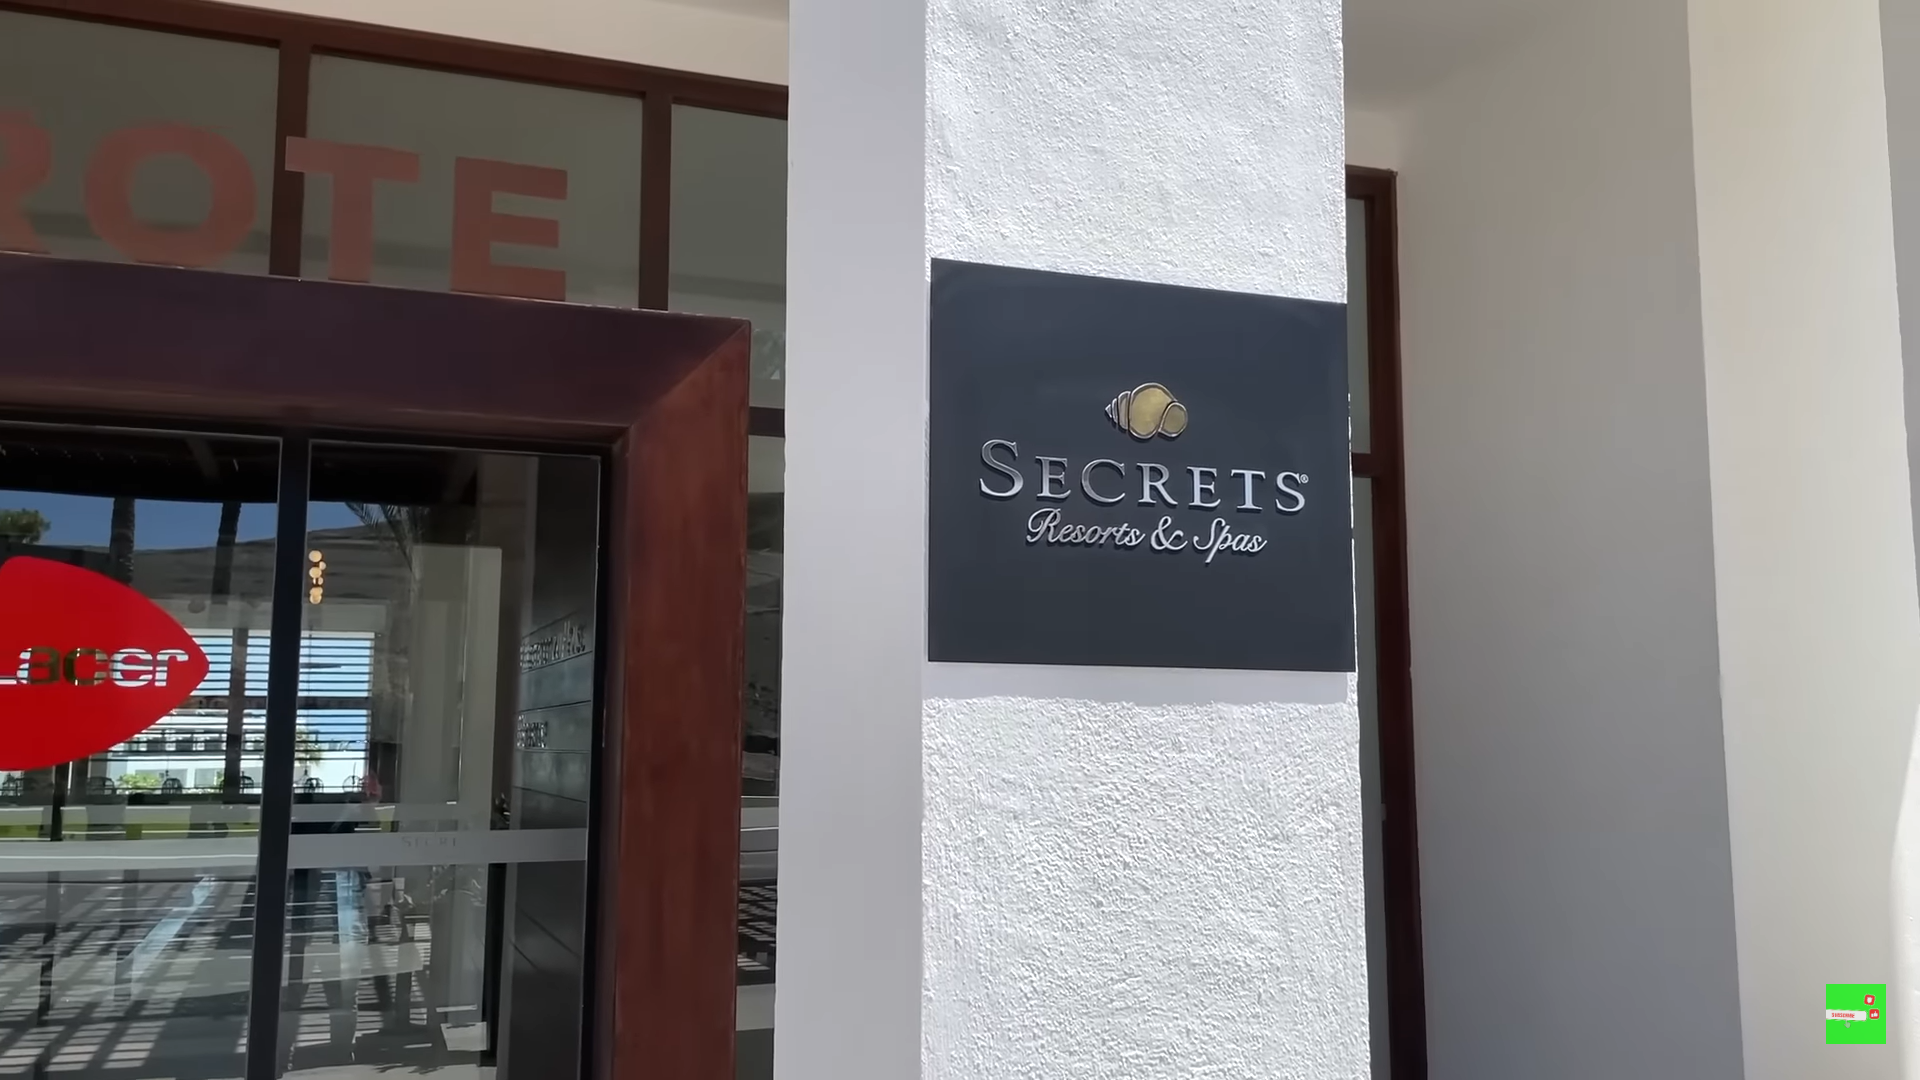 Secrets Lanzarote is a luxury adults-only resort located in the Canary Islands